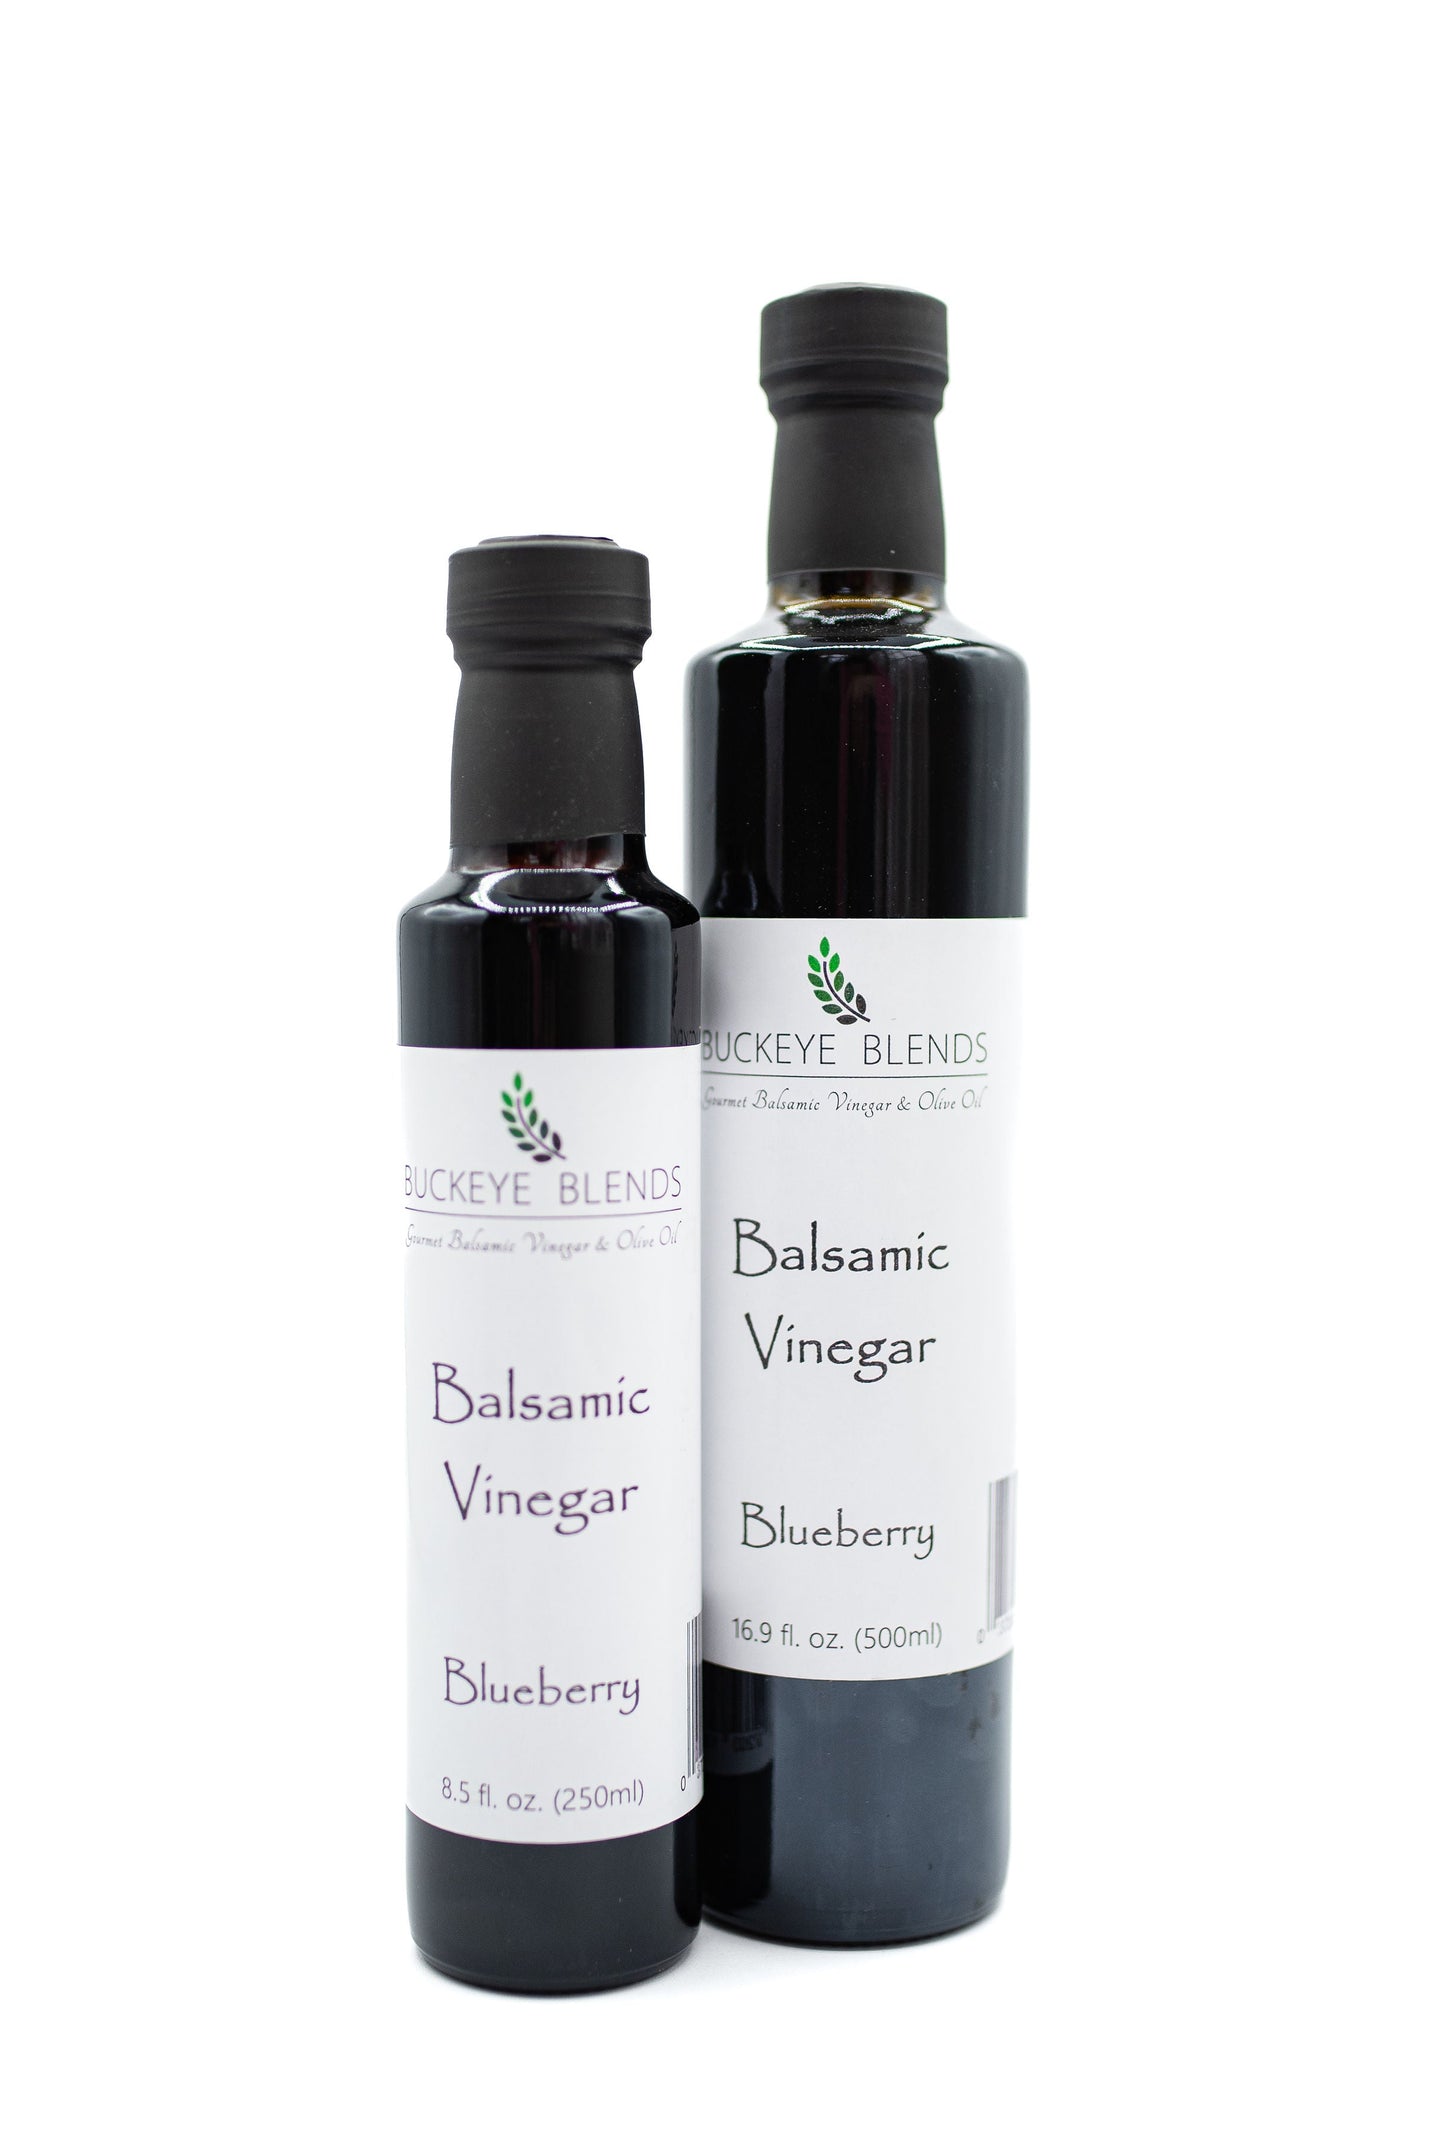 Buckeye Blends Blueberry Balsamic Vinegar is thick like a balsamic glaze and perfect over salad as a salad dressing, over ice cream, or cake.  Our blueberry balsamic is great mixed with olive oil or on its own.